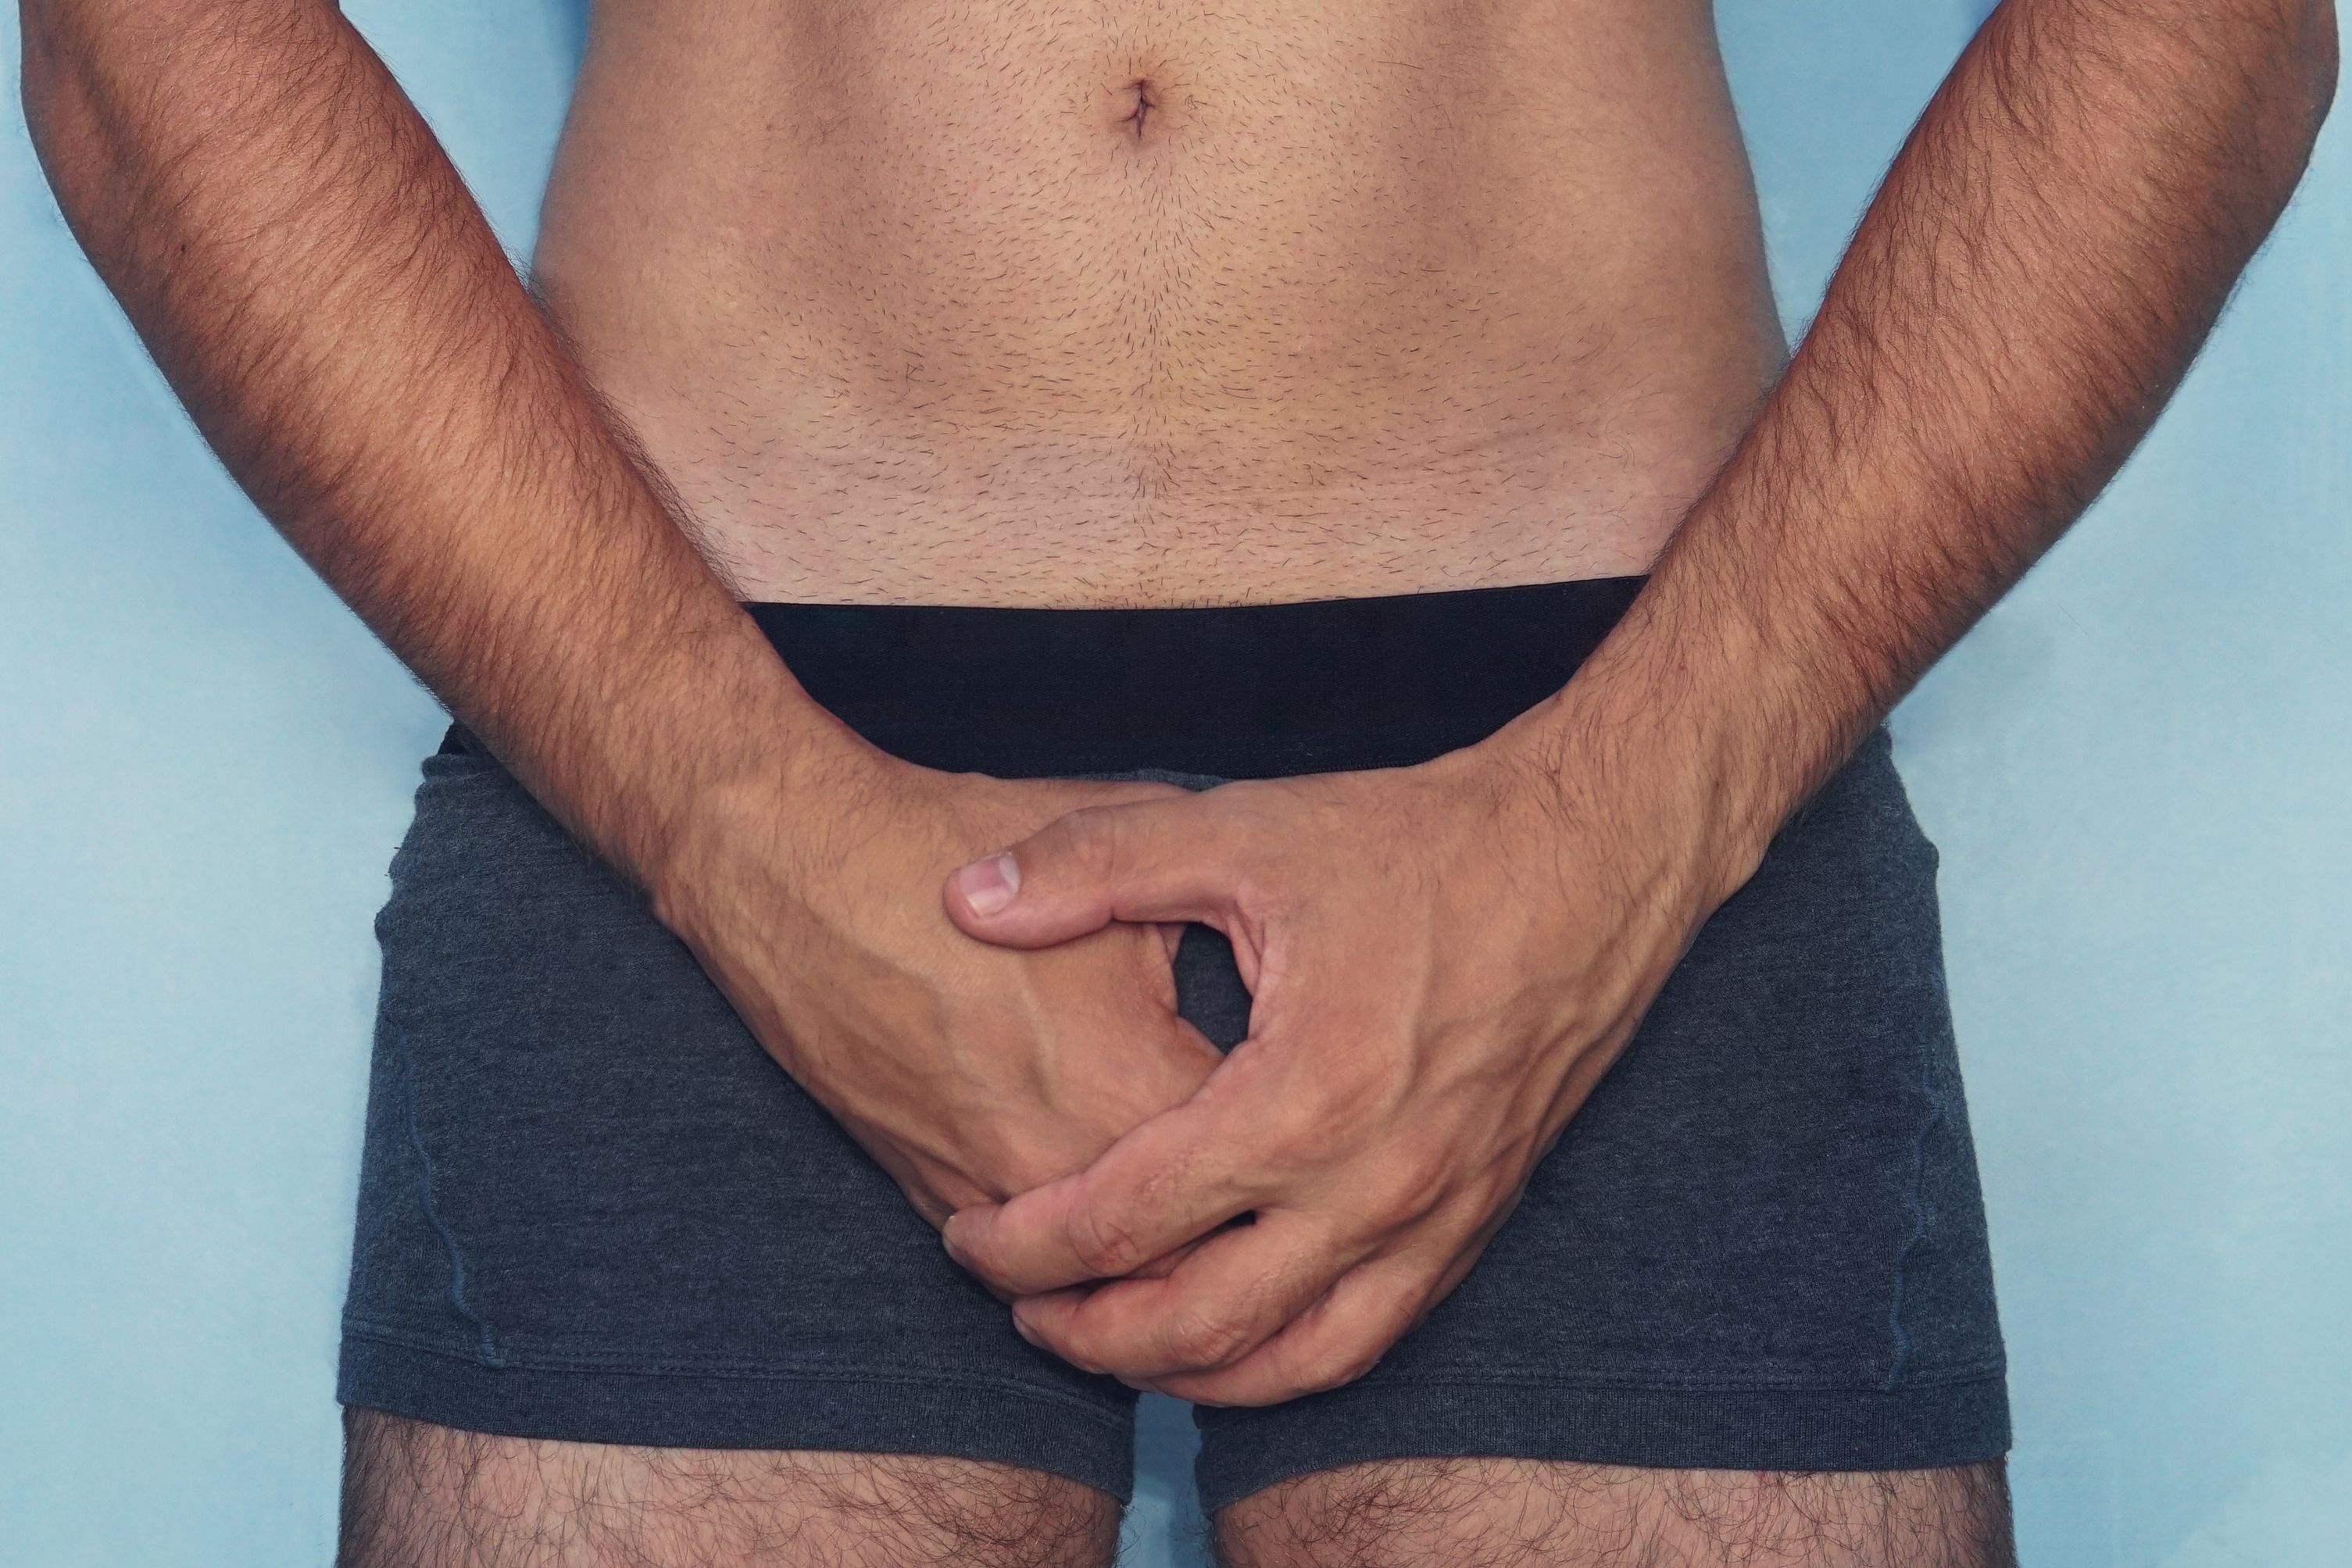 Penile fracture symptoms, causes and treatment